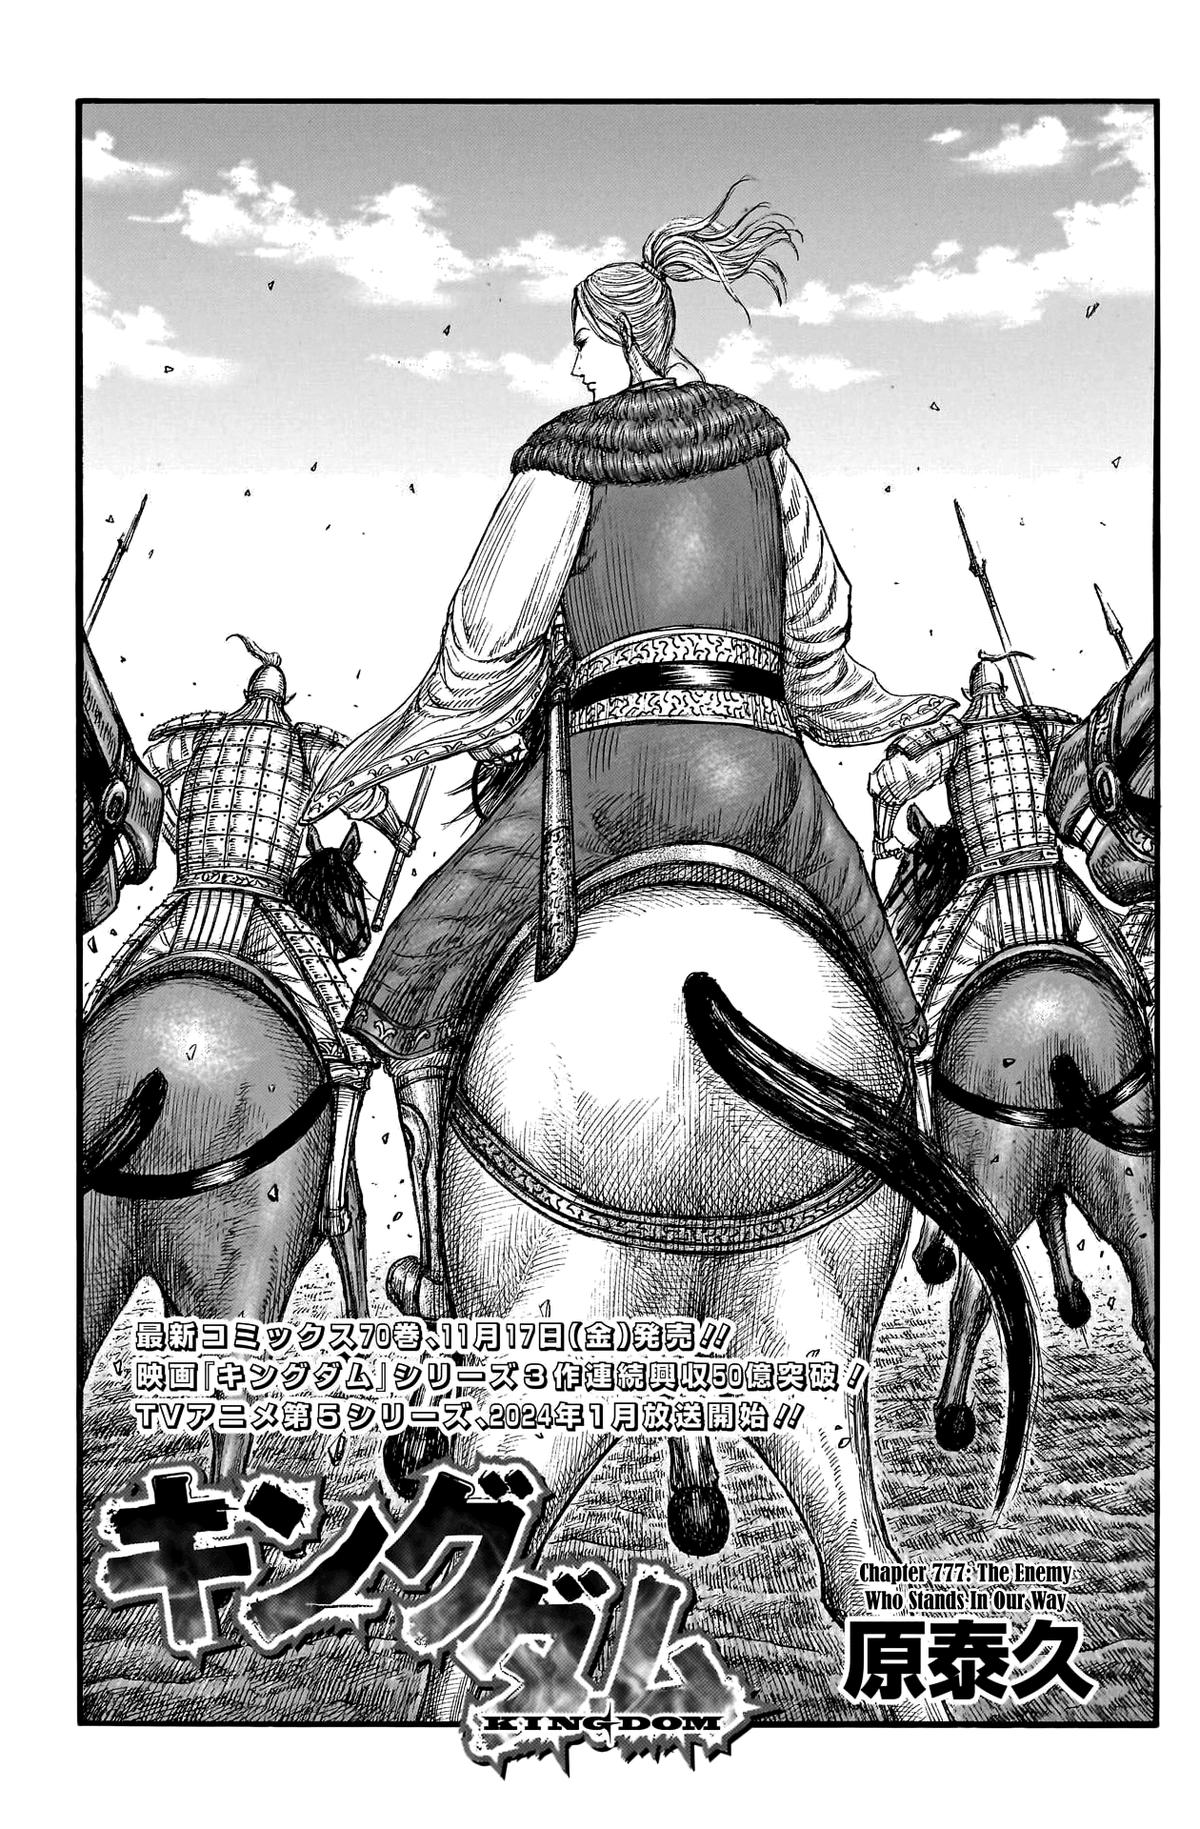 Vinland Saga Chapter 208 Release Date, Spoilers, Recap And What to